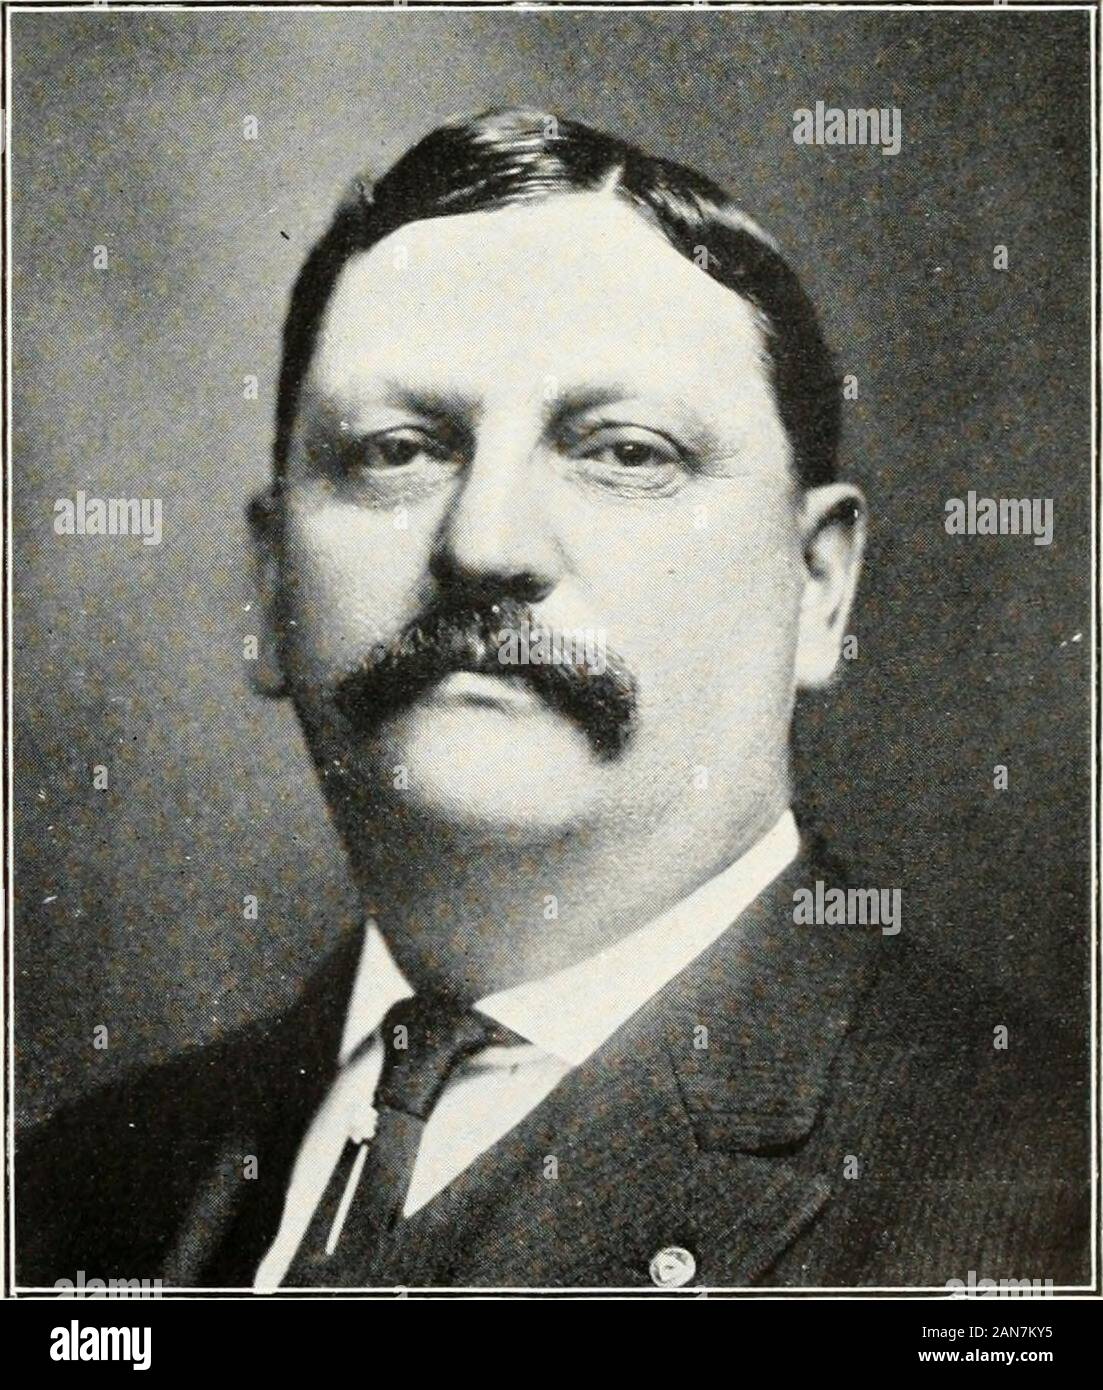 Distinguished men of Philadelphia and of Pennsylvania . TAYLOR, FRED ^^., steamship agt. and broker; b. inPhila.; ed. in public schools: general manager, succeeding hisfather as pres. of Phila. Grain Elevator Co., in 1893; chargeof coal and shipping wharves, Phila. and Reading R. R., atPort Richmond, 1889 to 1898: and coal float of Phila anaReading R. R.. 1890 to 1898: connected with steamship linesoperating freight service between Phila. and English ports;president of Charles M. Taylors Sons, Inc., Steamship Agts.and Brokers, representing various steamship lines.. Marccau DICKWITZ, FERDIXAND Stock Photo